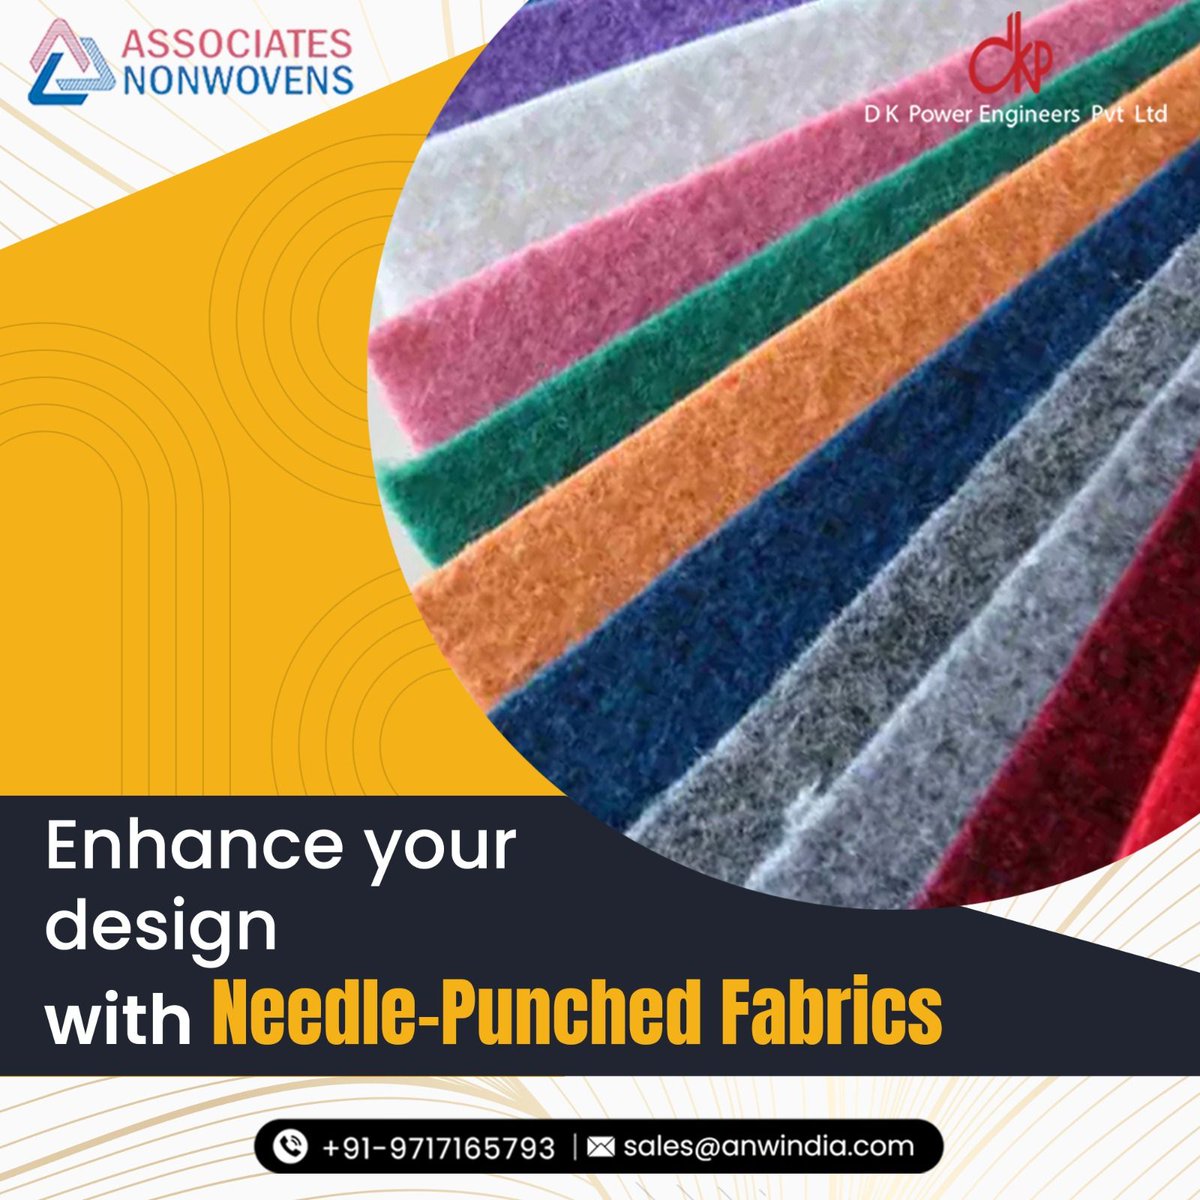 Discover endless creativity with our needle-punched fabrics. 
.
.
For more details
Associates Non-Wovens
email id - sales@anwindia.com
website - anwindia.com
.
.
#associatesnonwovens #needlepunch #nonwovenfabric #premiumquality #brandpromotion #promoteyourbrand